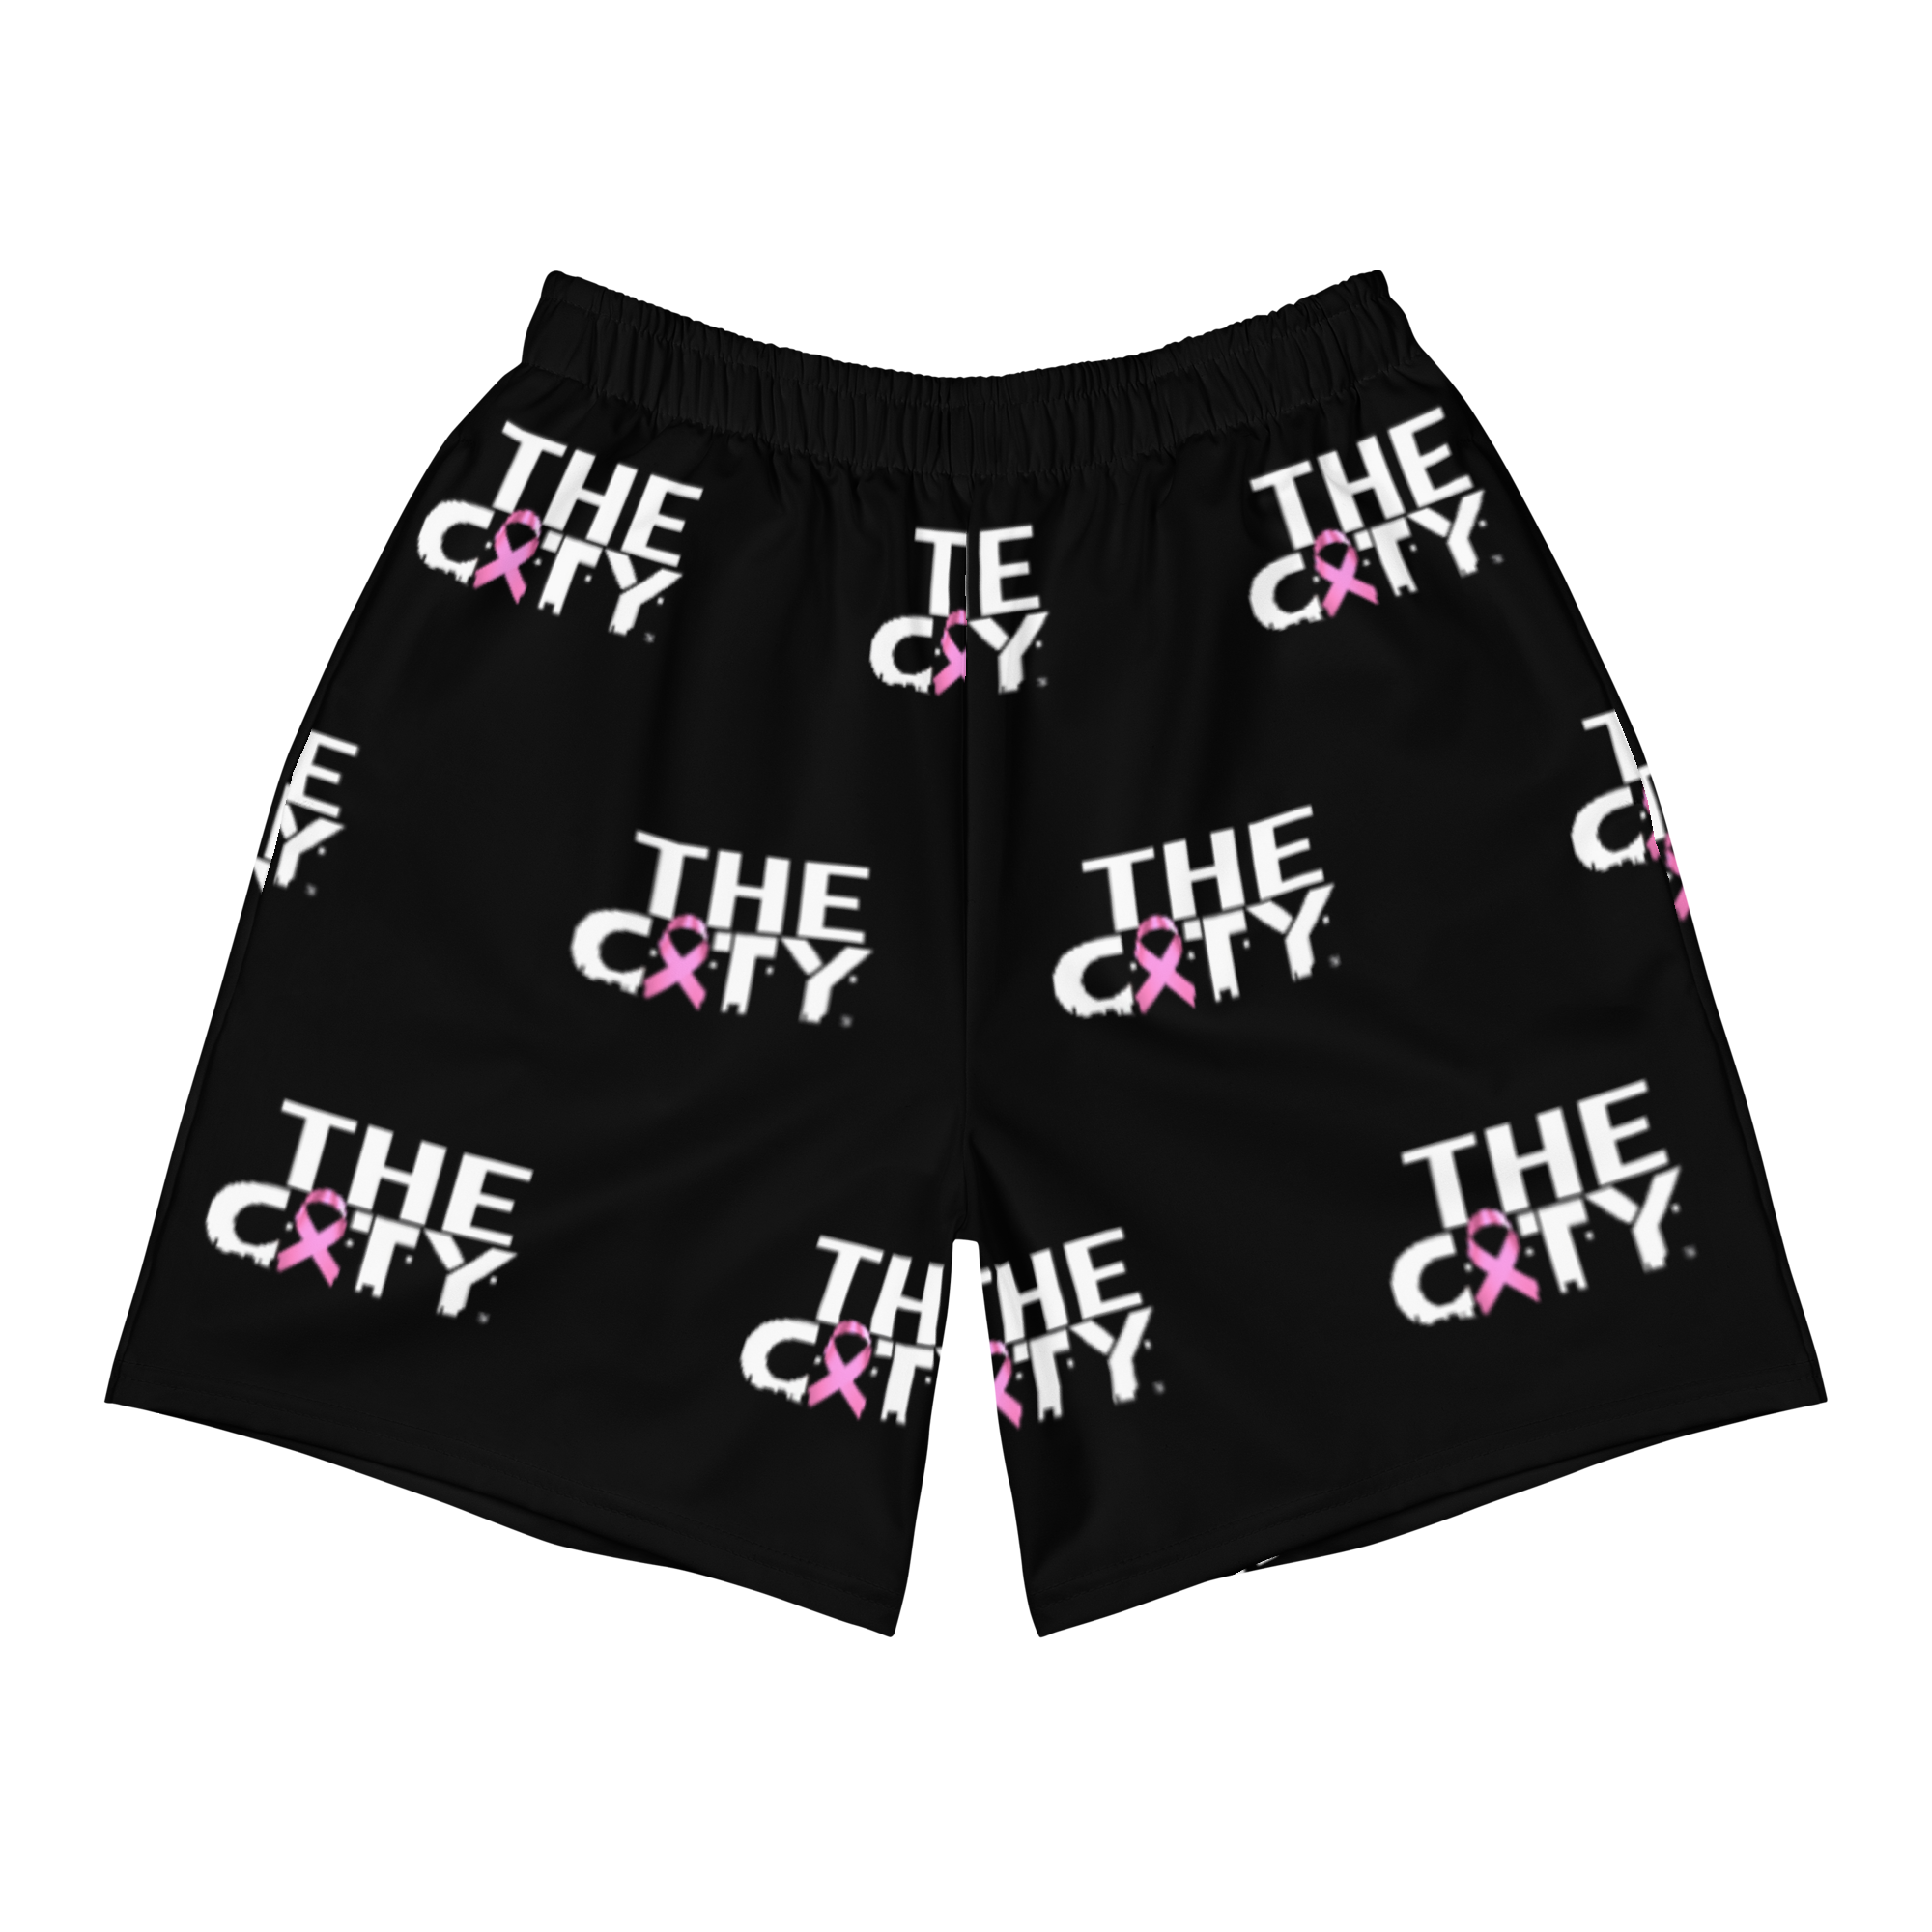 THE C.I.T.Y. Breast Cancer Awareness BLK Men's Athletic Long Shorts